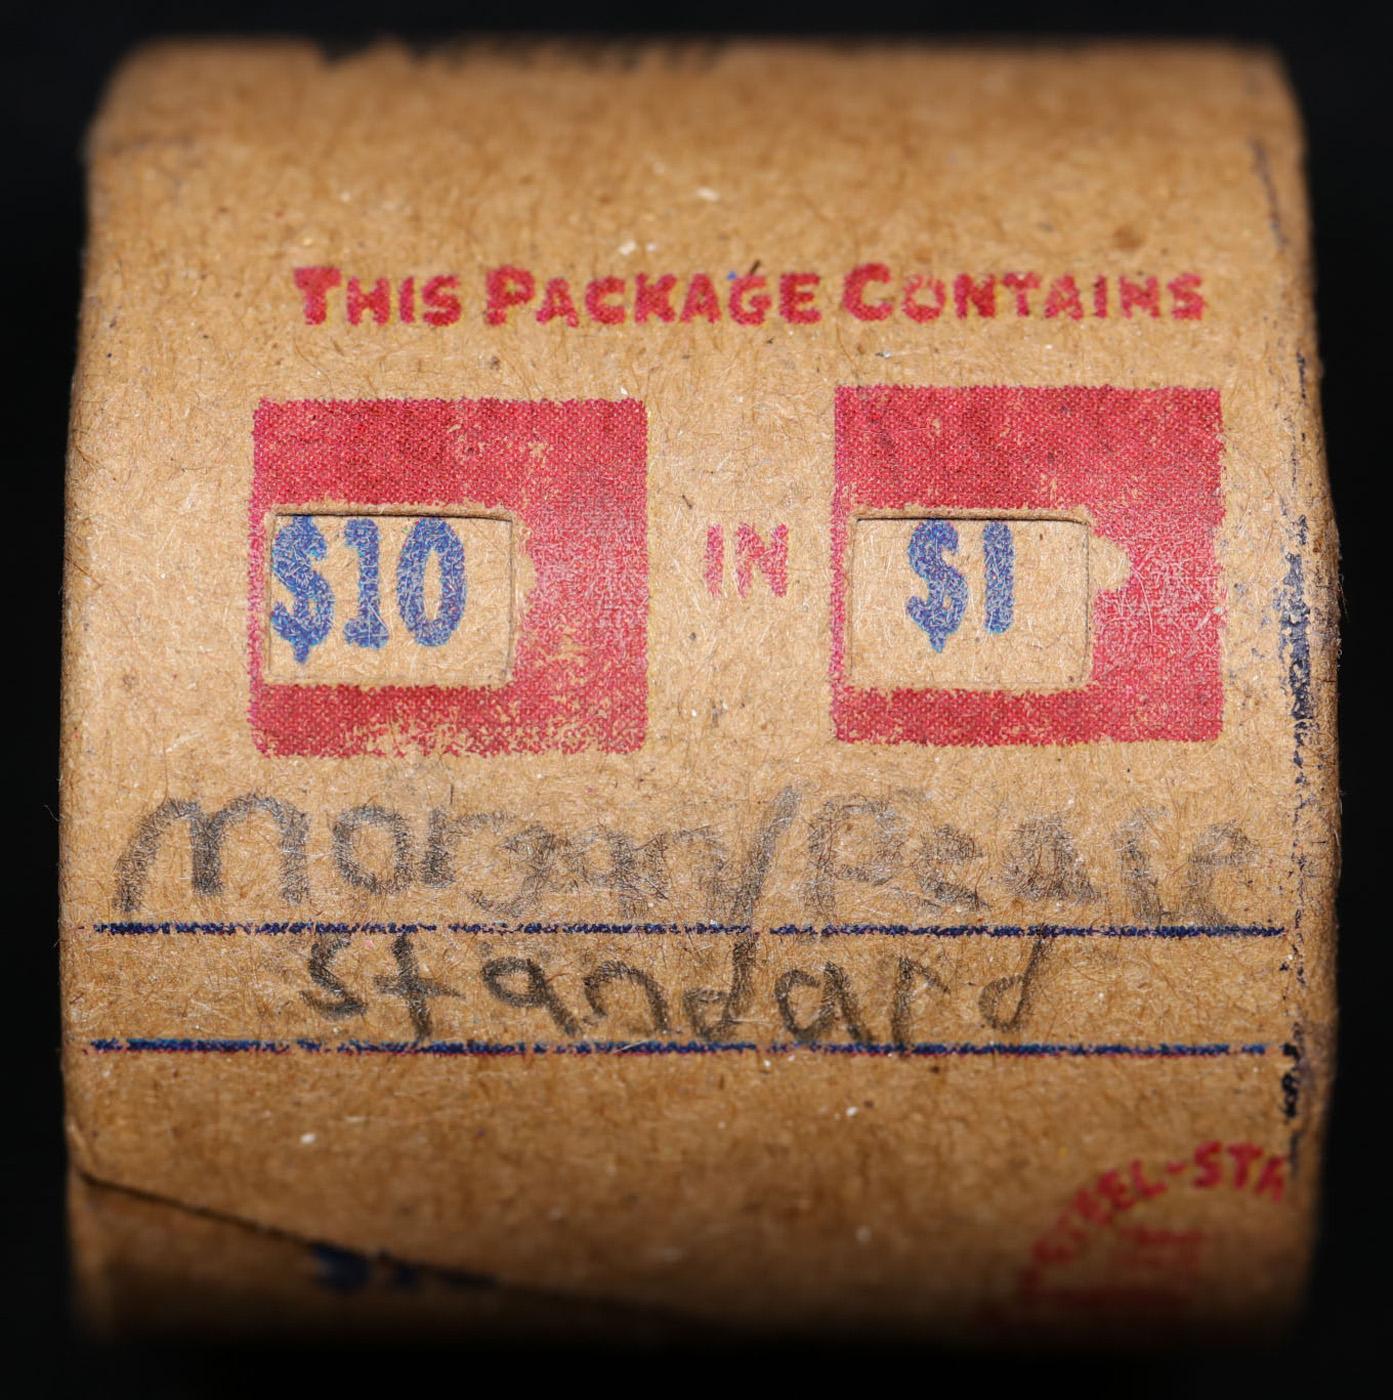 *EXCLUSIVE* x10 Mixed Covered End Roll! Marked "Morgan/Peace Standard"! - Huge Vault Hoard  (FC)